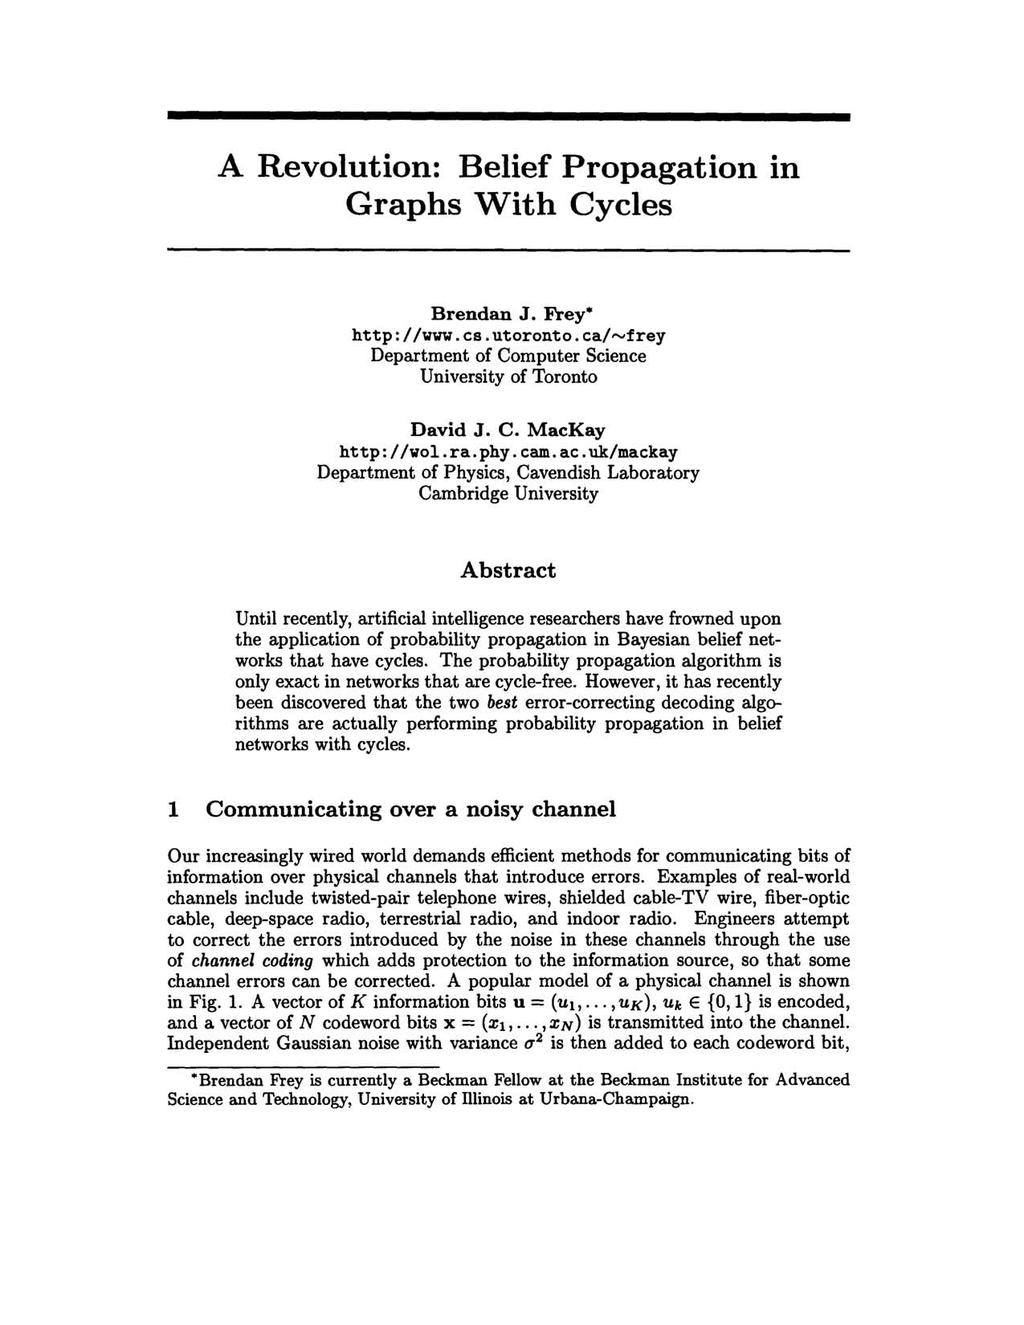 Loopy Belief Propagation A Revolution: Belief Propagation Graphs With Cycles In NIPS 1997: https://papers.nips.cc/paper/1467-a-revolution-belief-propagation-in-graphs-with-cycles Brendan J.